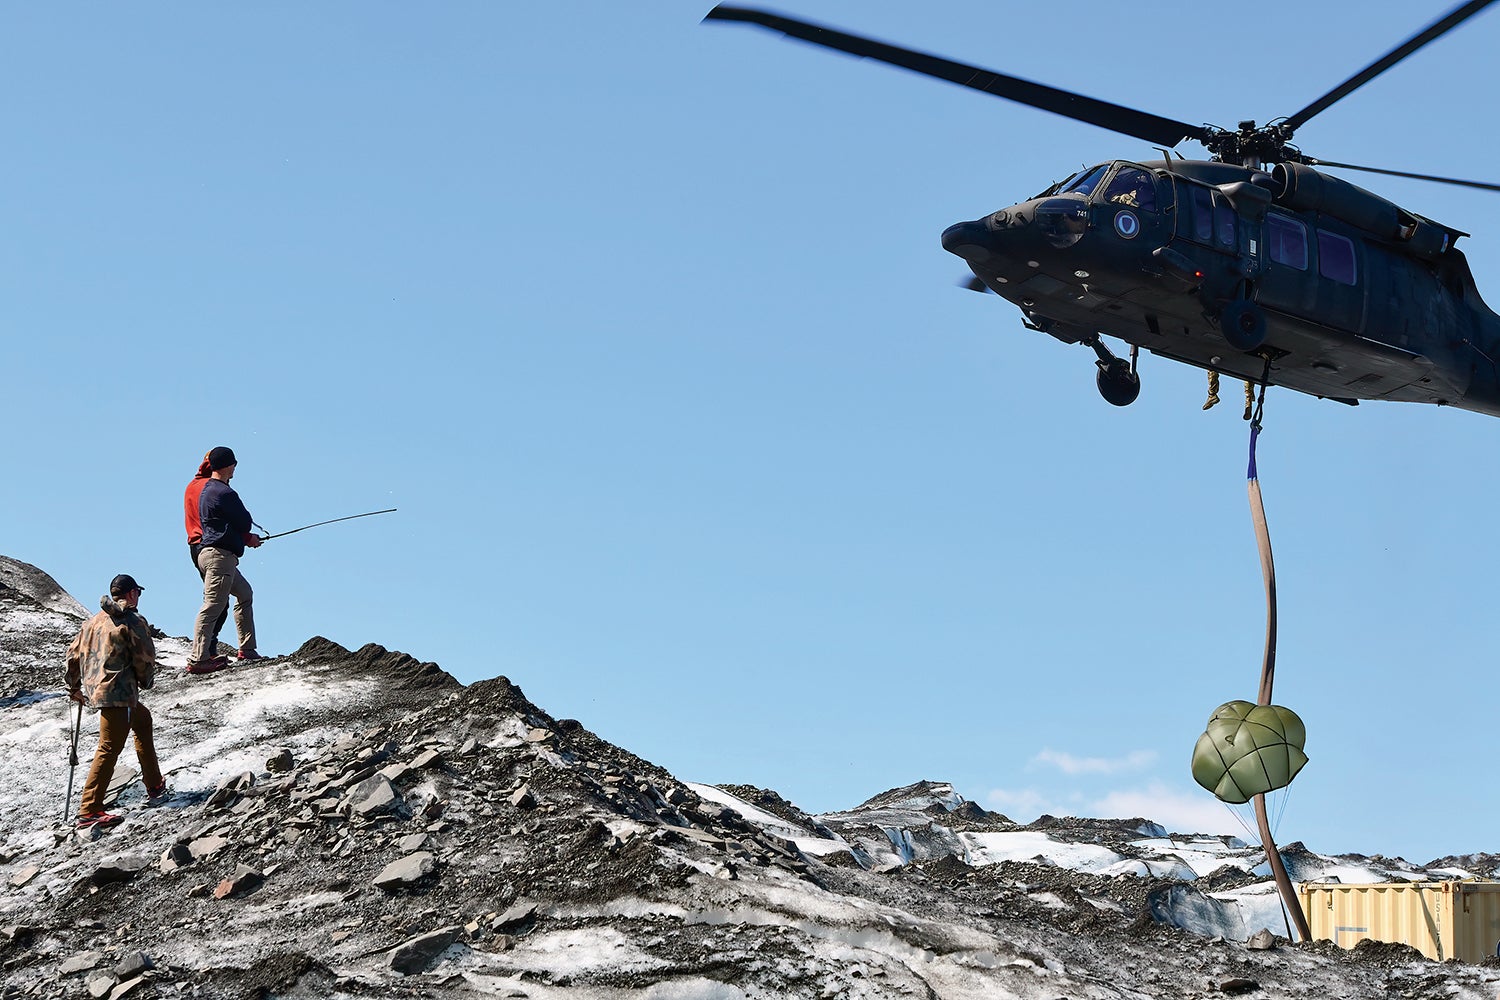 Soldiers work on Colony Glacier, Alaska, assisted by a Black Hawk helicopter from the Alaska National Guard. (Credit: U.S. Army/John Pennell)